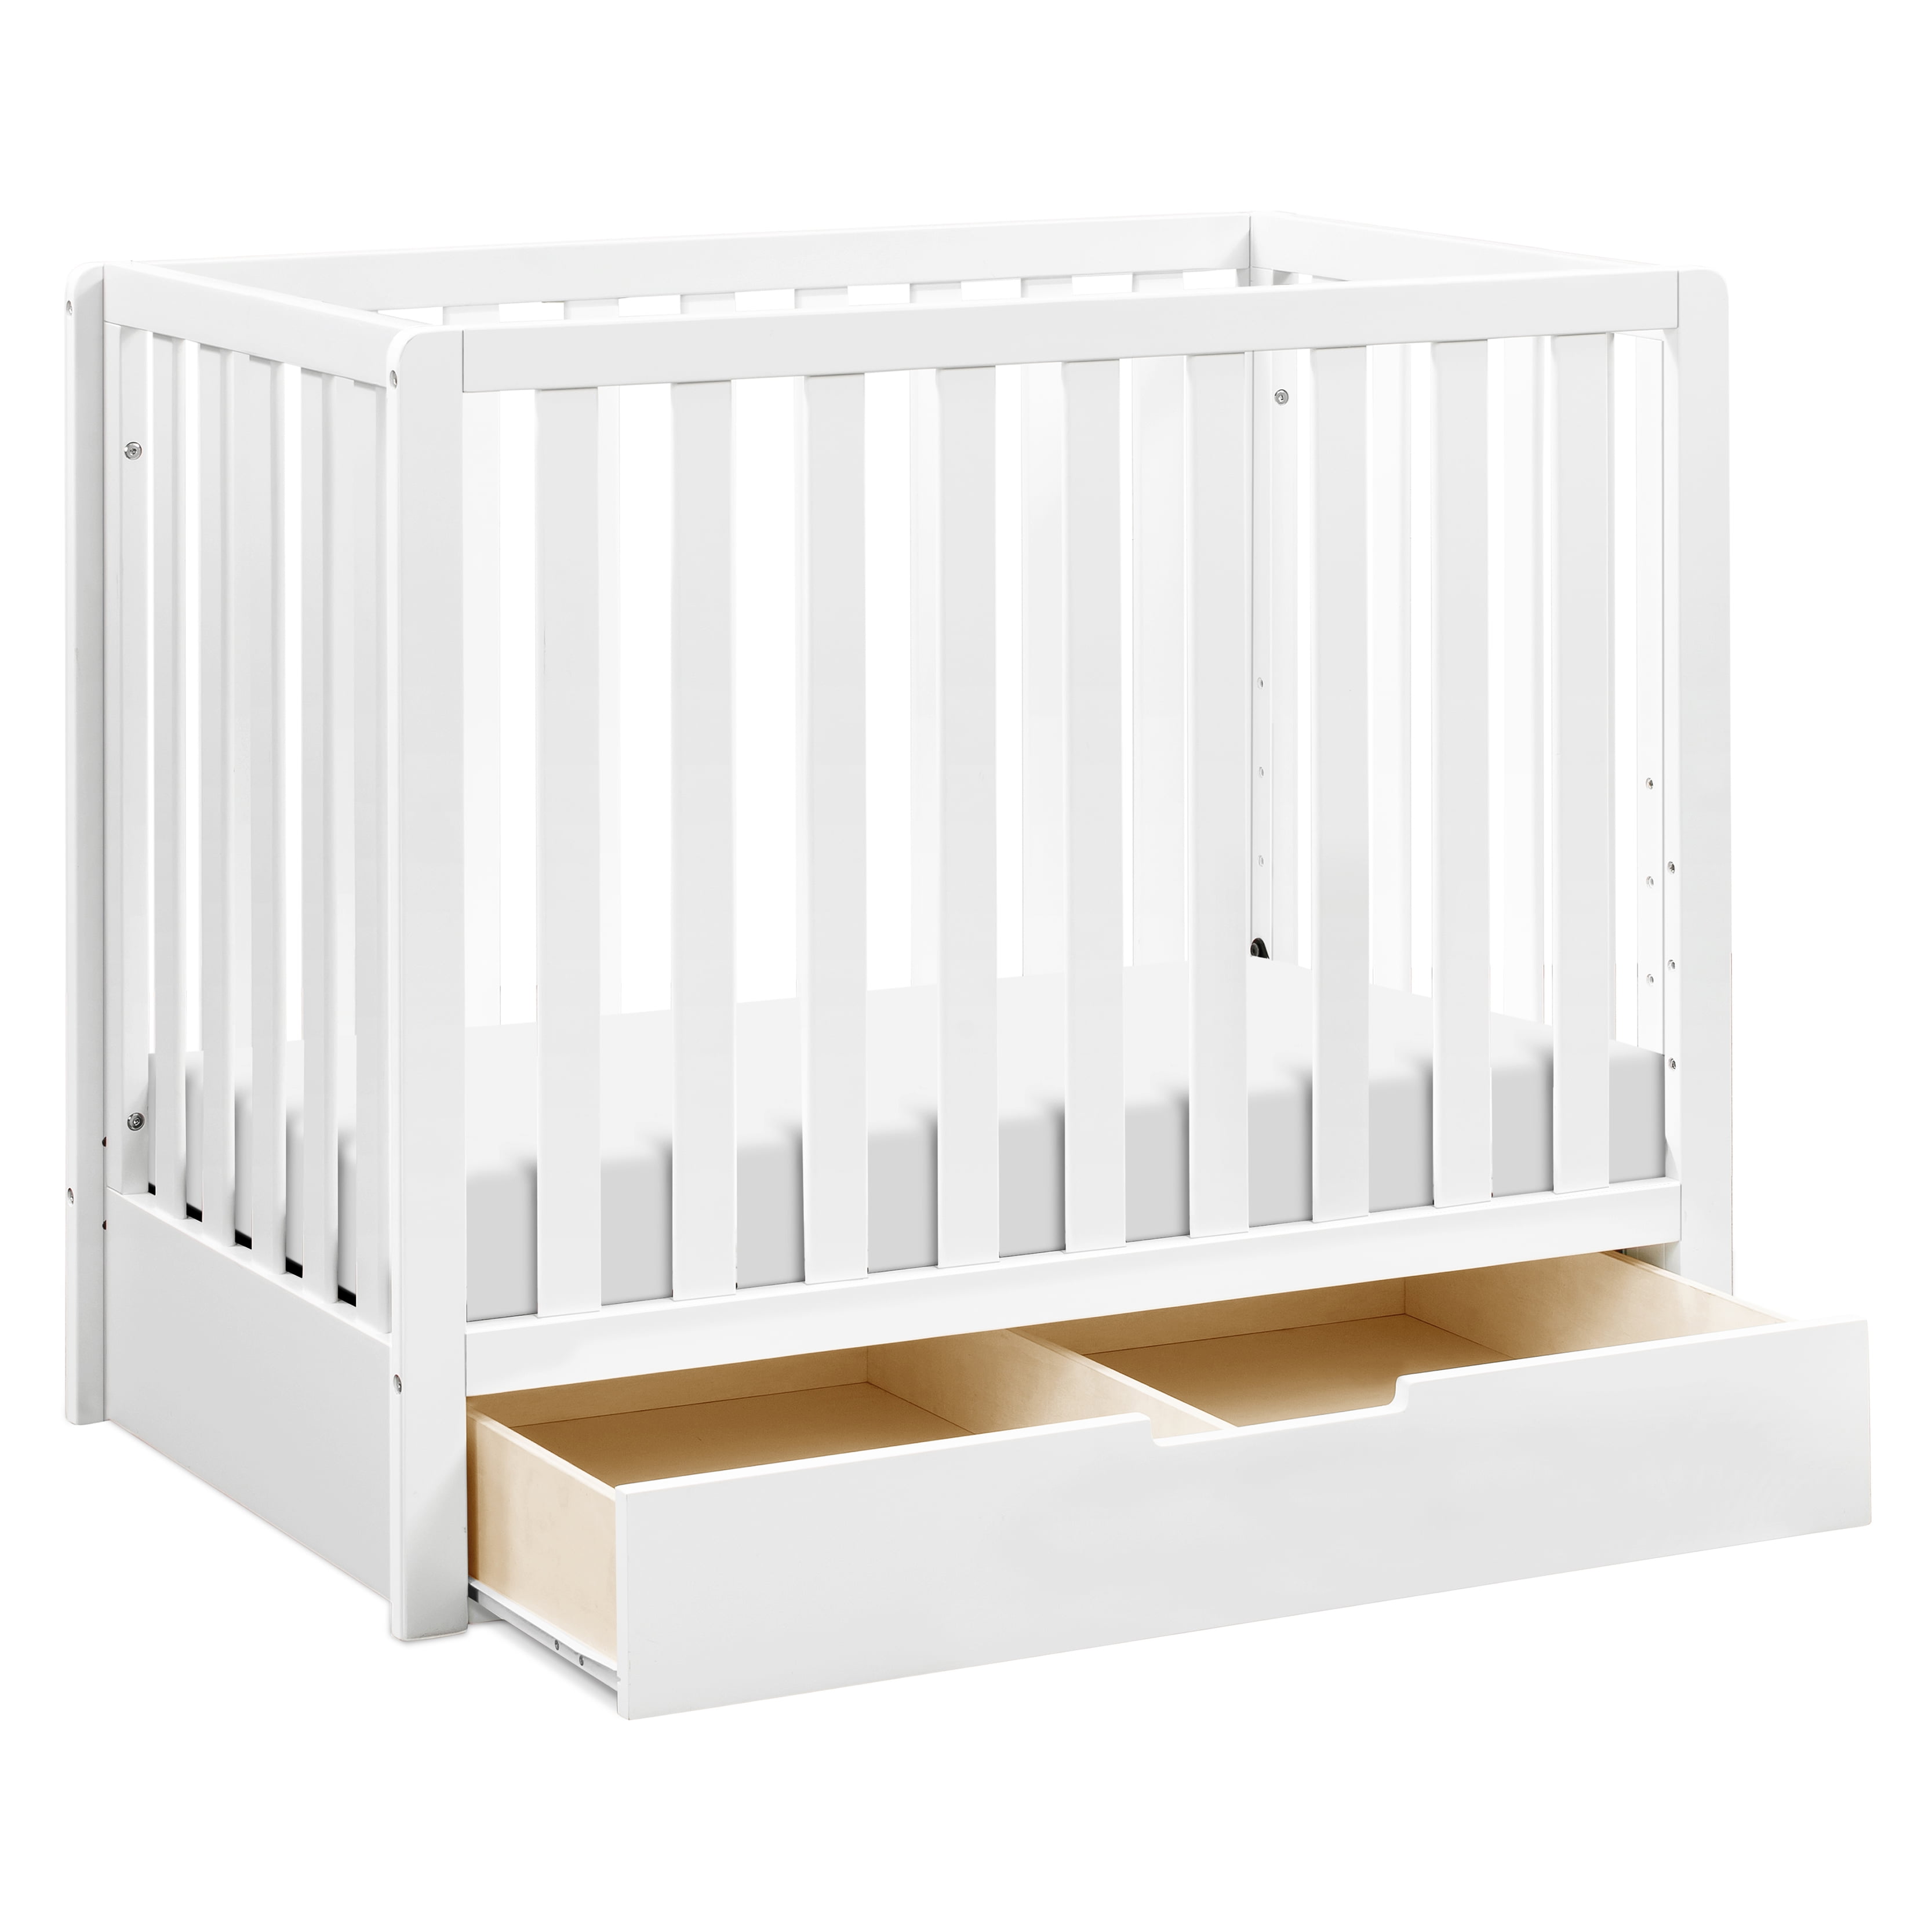 Carters by DaVinci Colby 4-in-1 Convertible Mini Crib with Trundle in Washed Natural Greenguard Gold Certified 